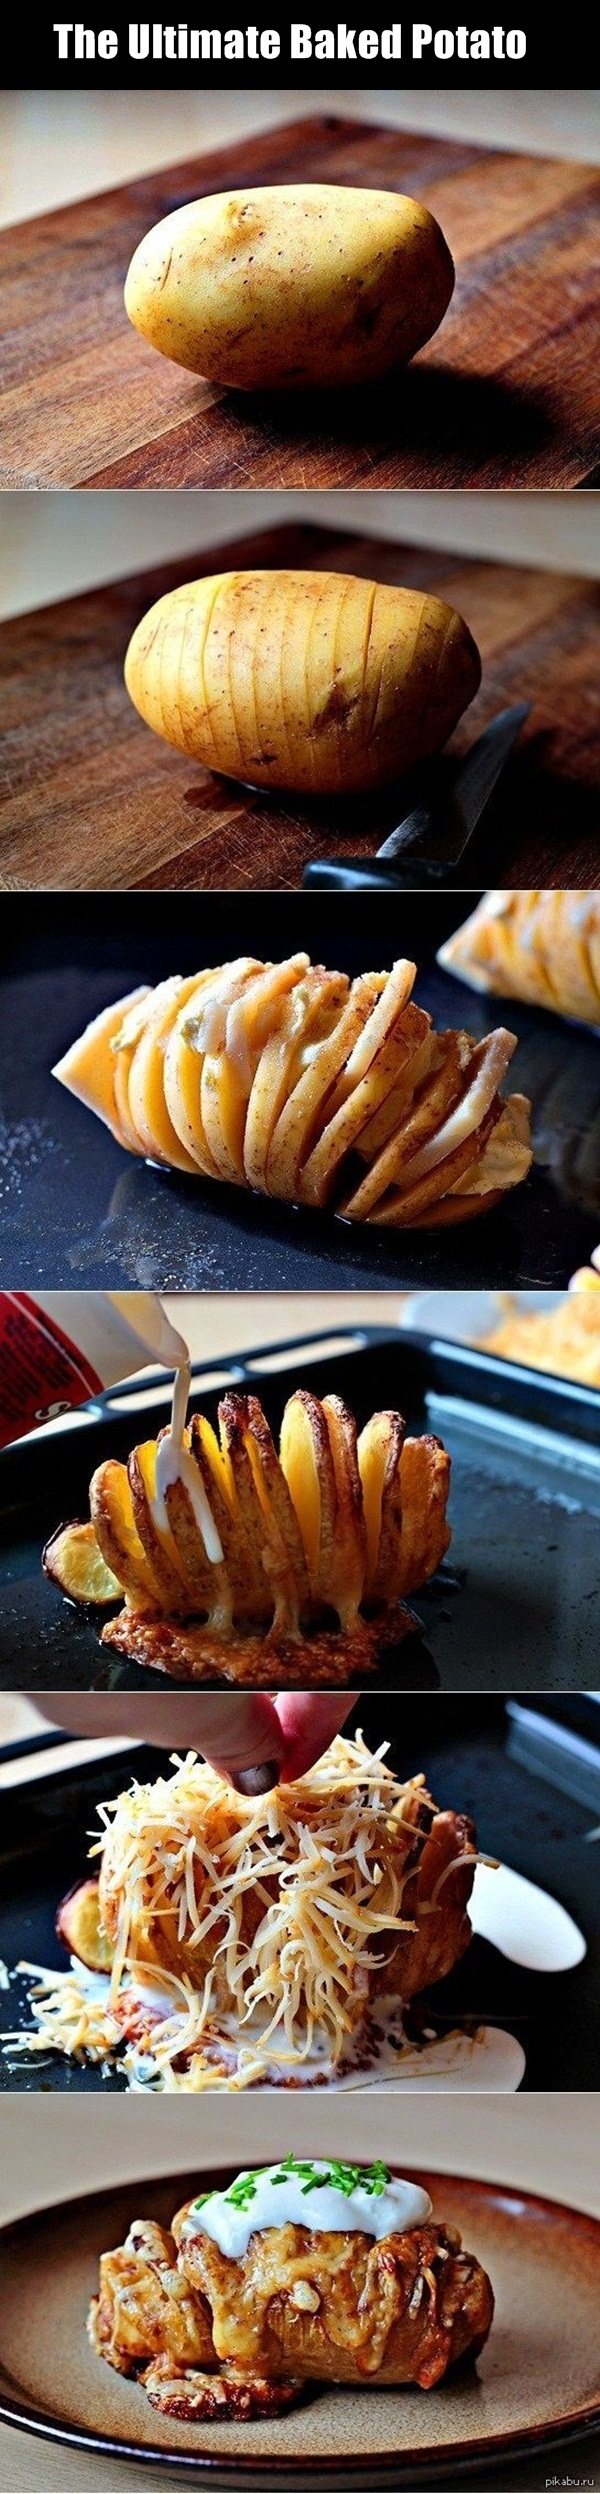 17.) This is the only way you'll eat baked potatoes from now on.